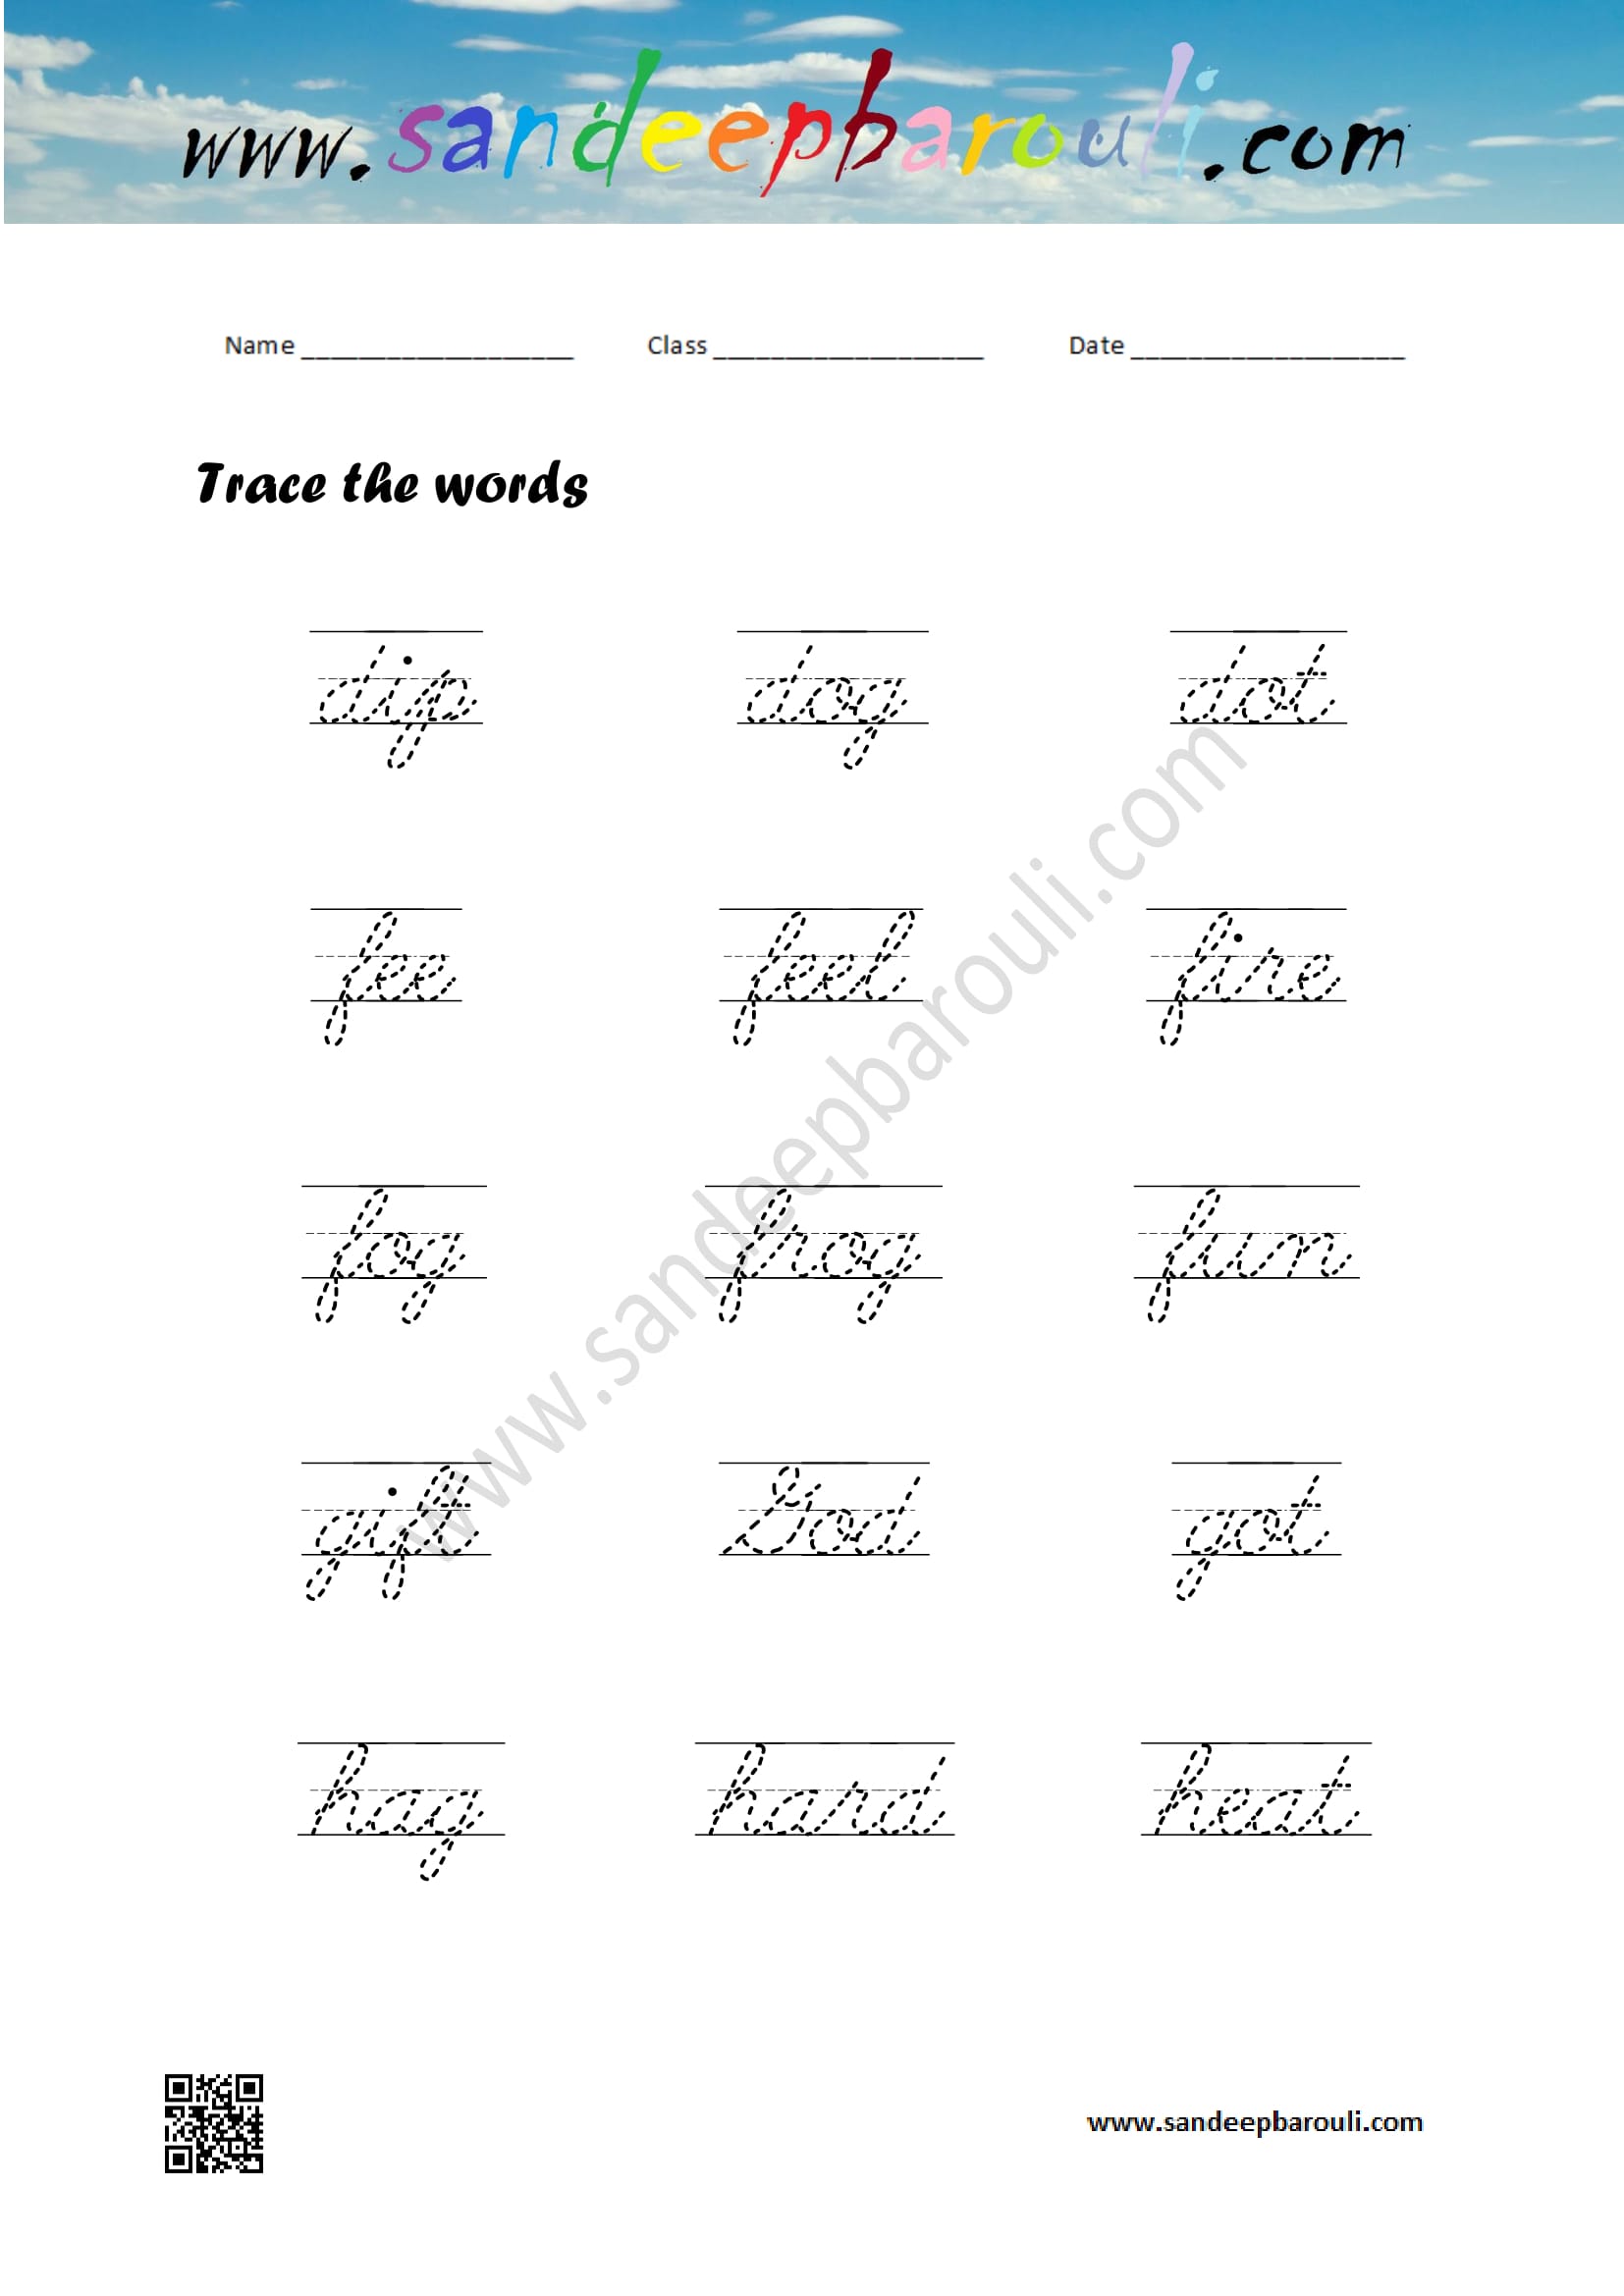 Cursive Writing Worksheet – Trace the words (3)